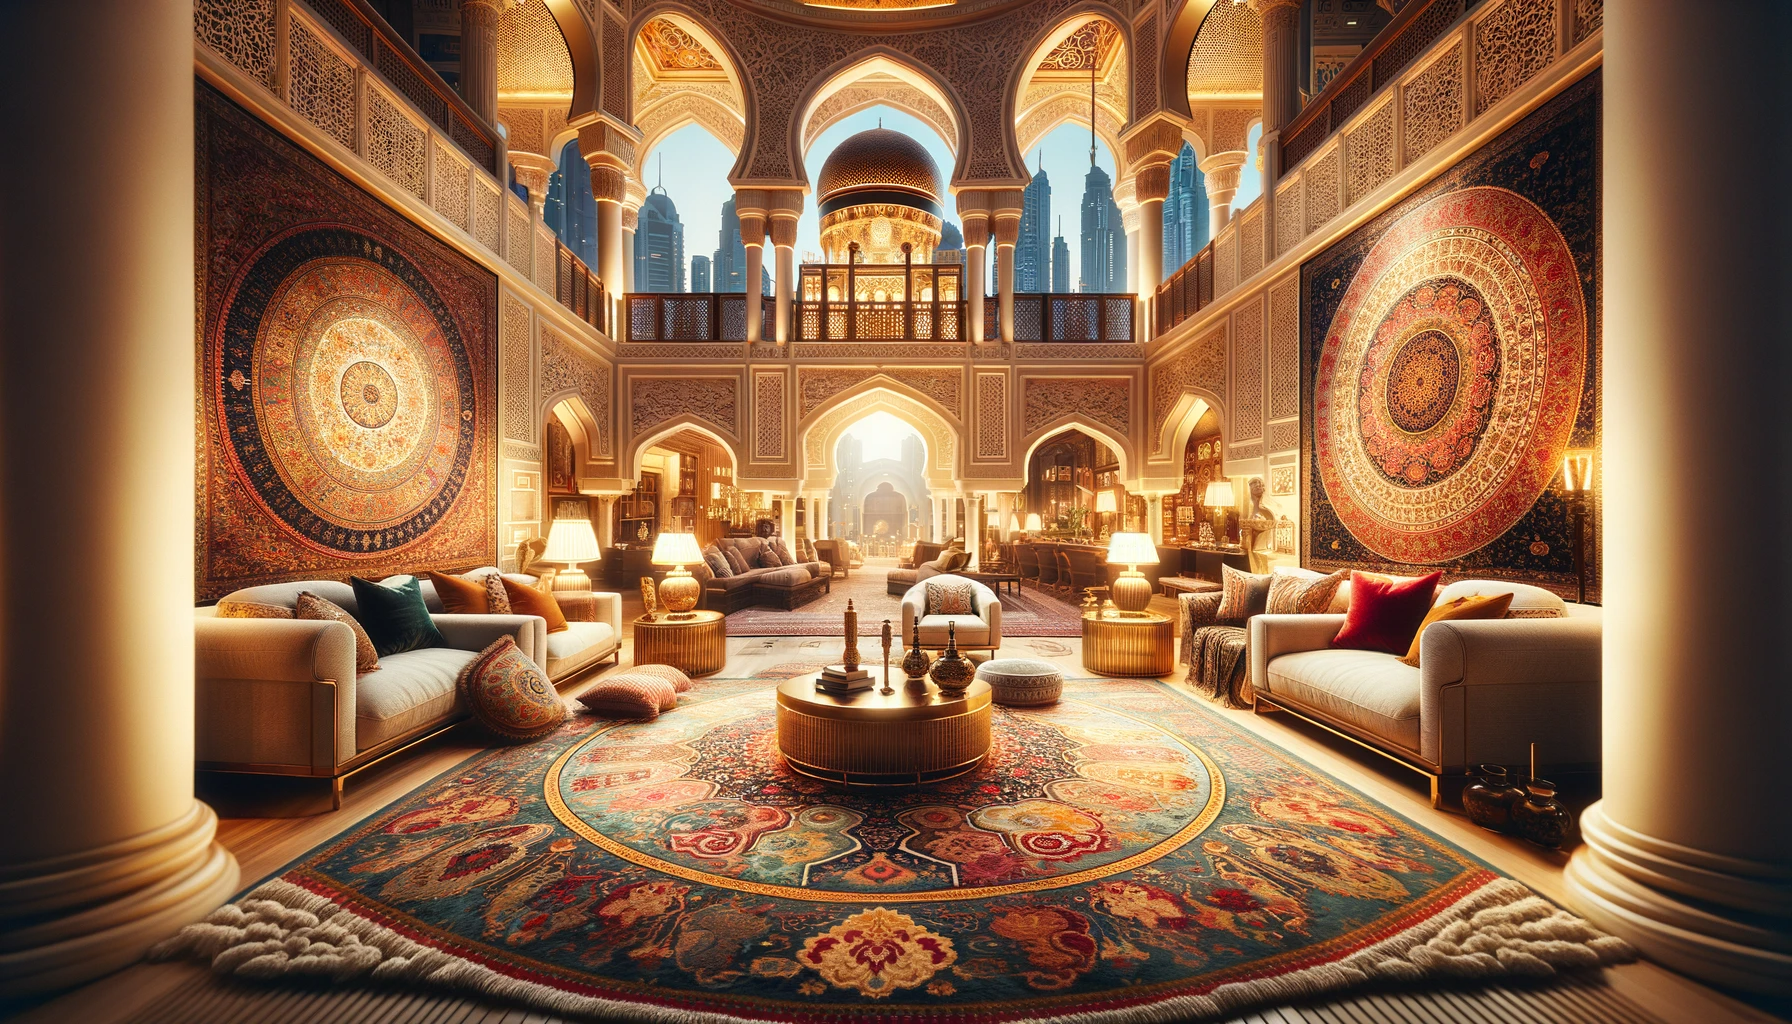 Show a lavish interior in Dubai with a variety of luxury rugs on display